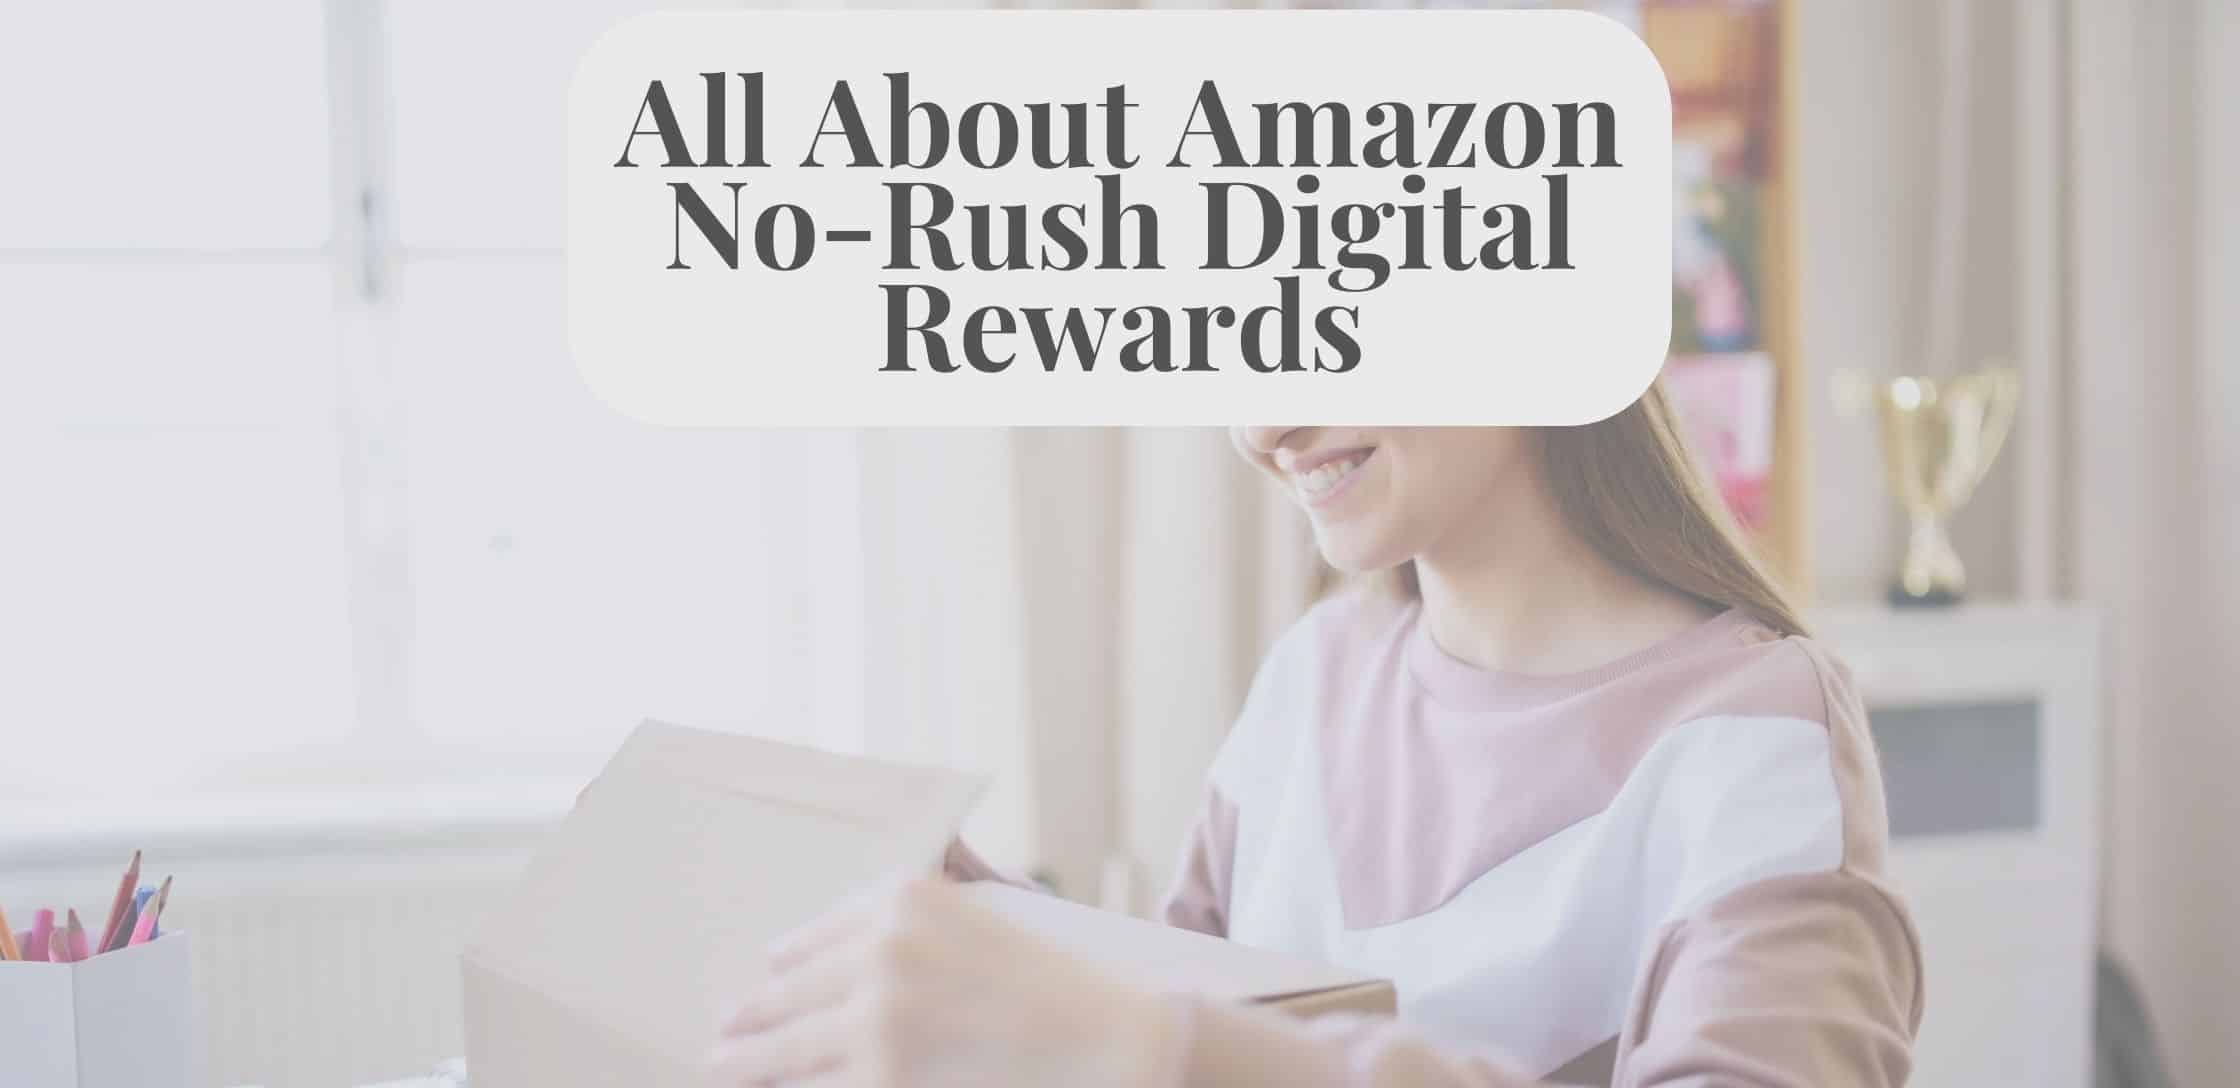 A GUIDE ON HOW TO USE  DIGITAL REWARDS IN